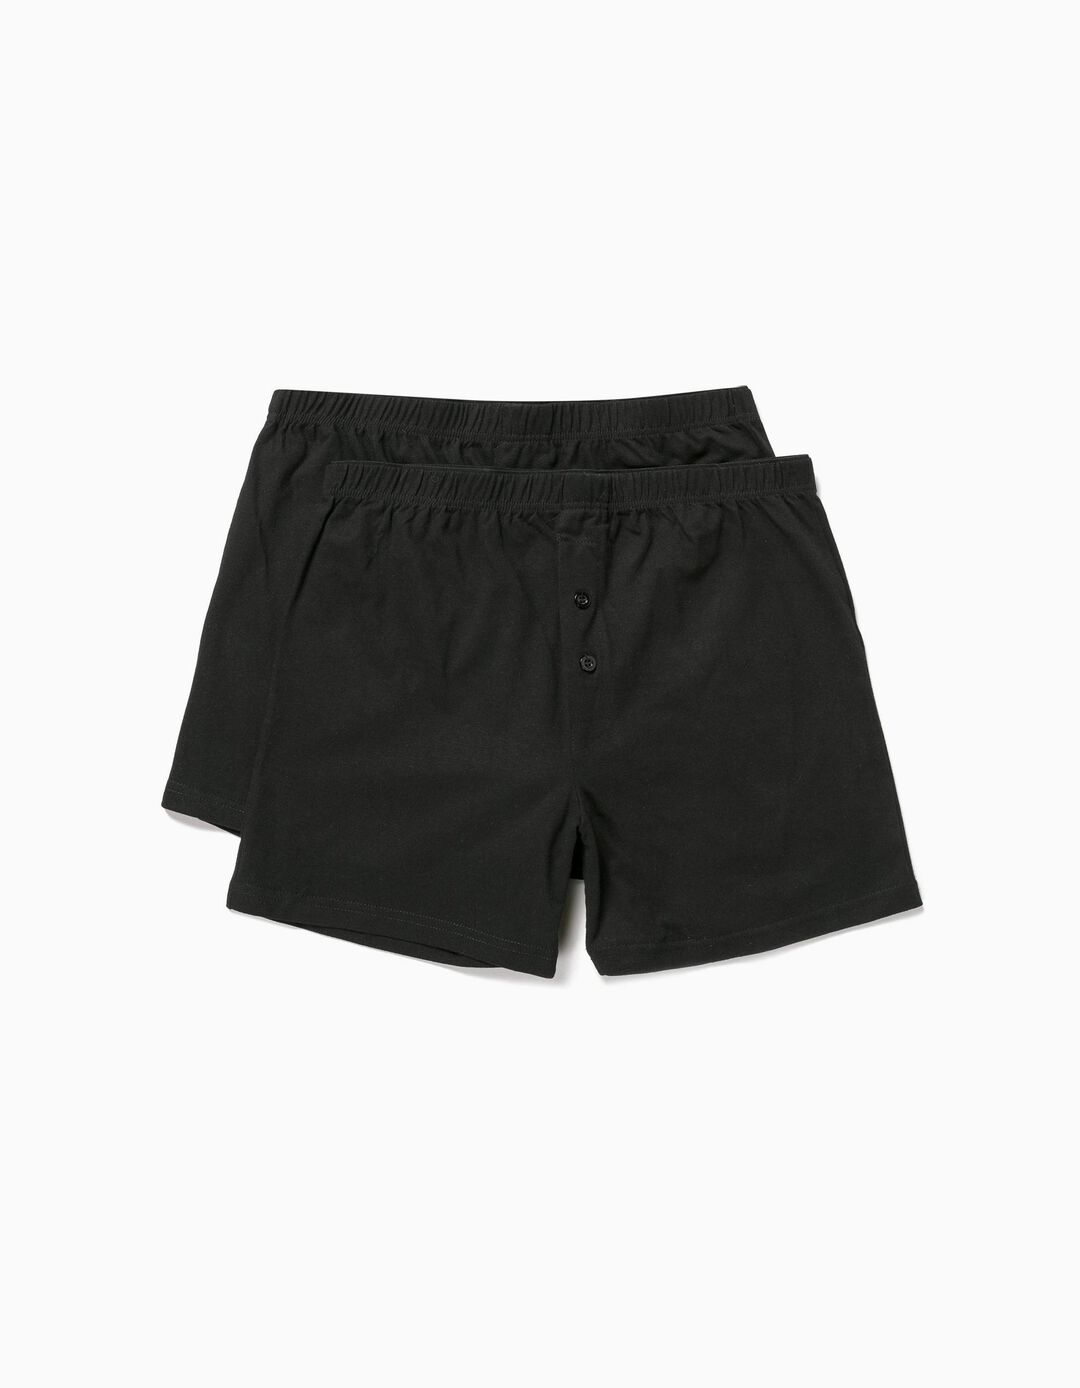 Pack of 2 Boxer Shorts